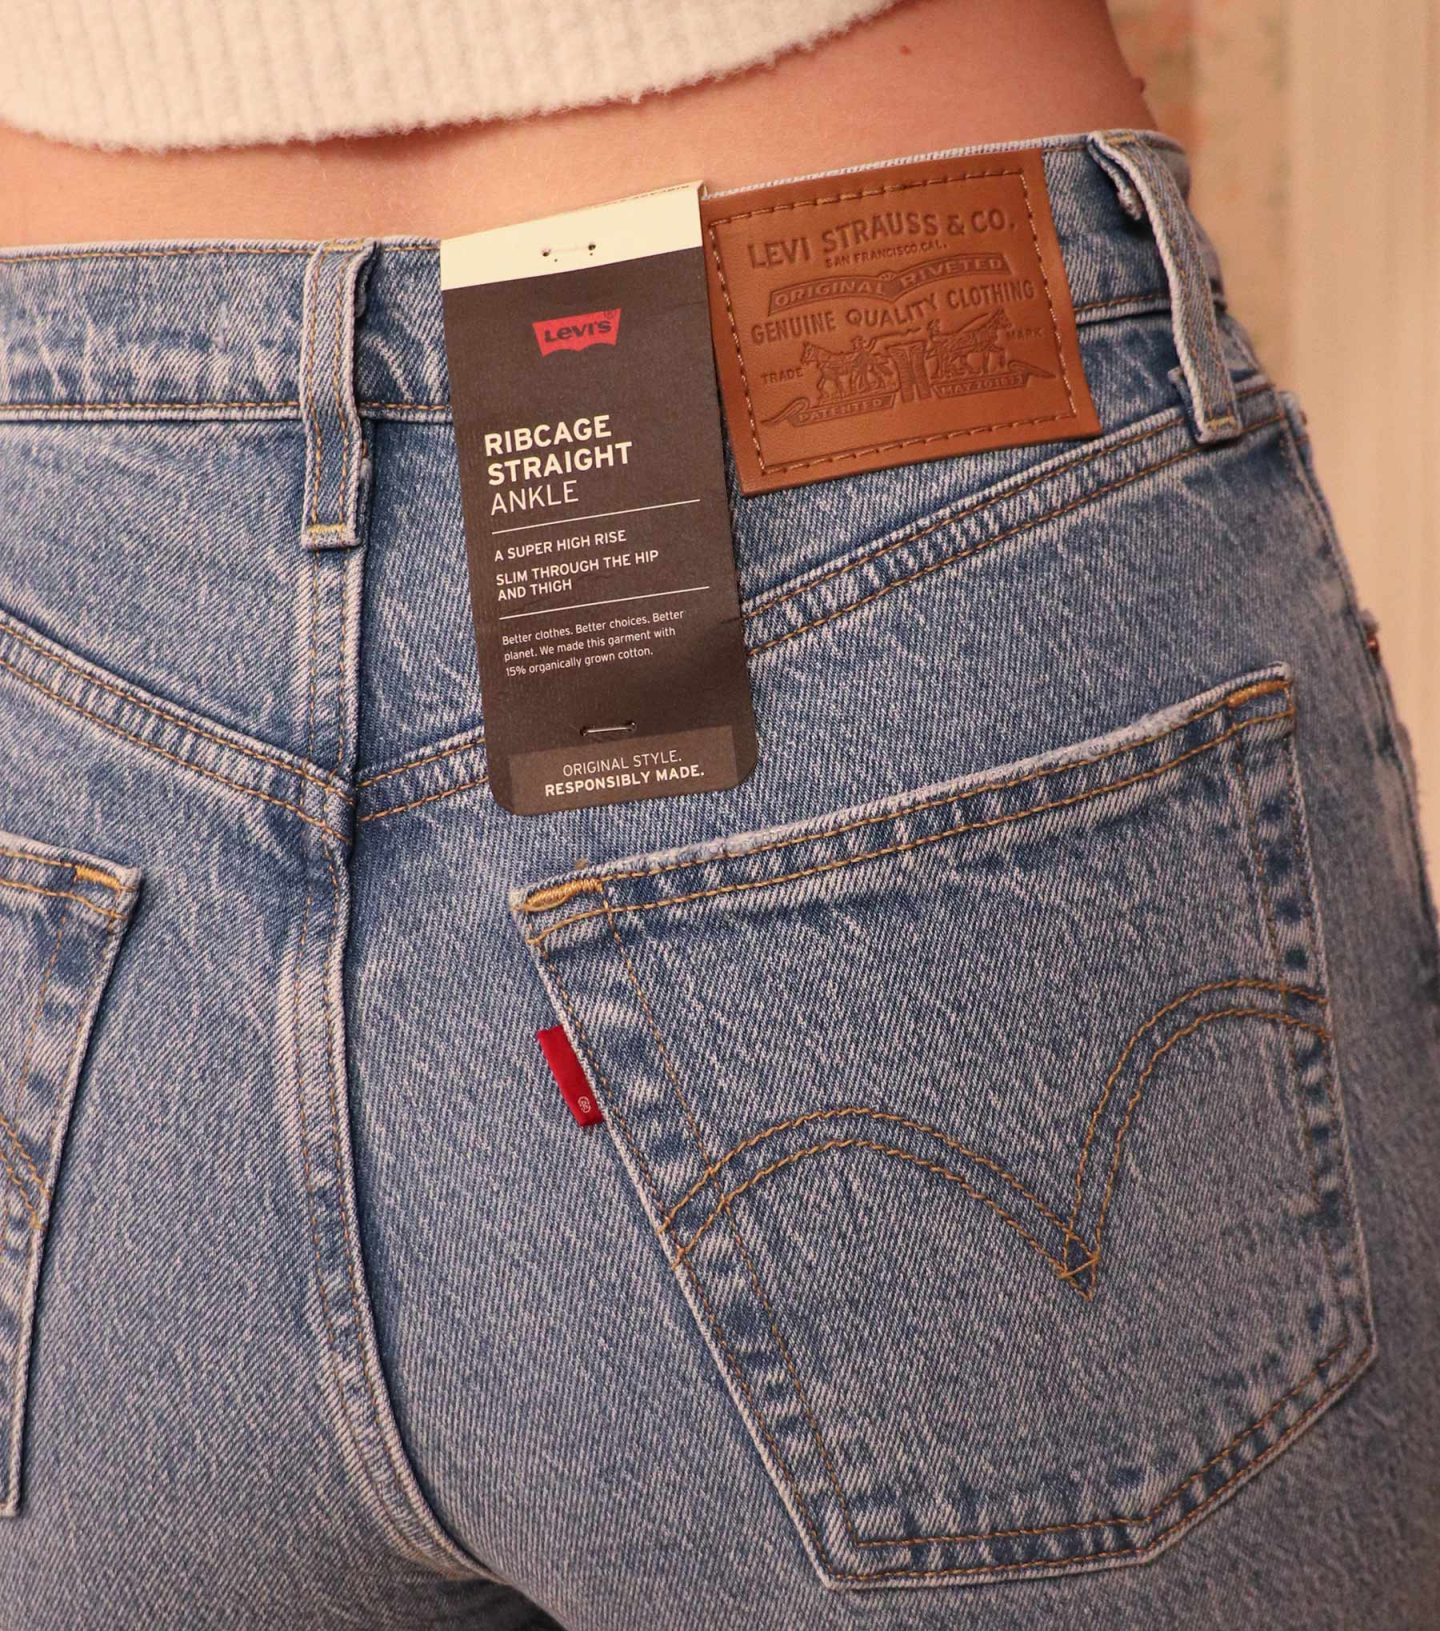 Levi's Ribcage Jeans - THE JEANS BLOG